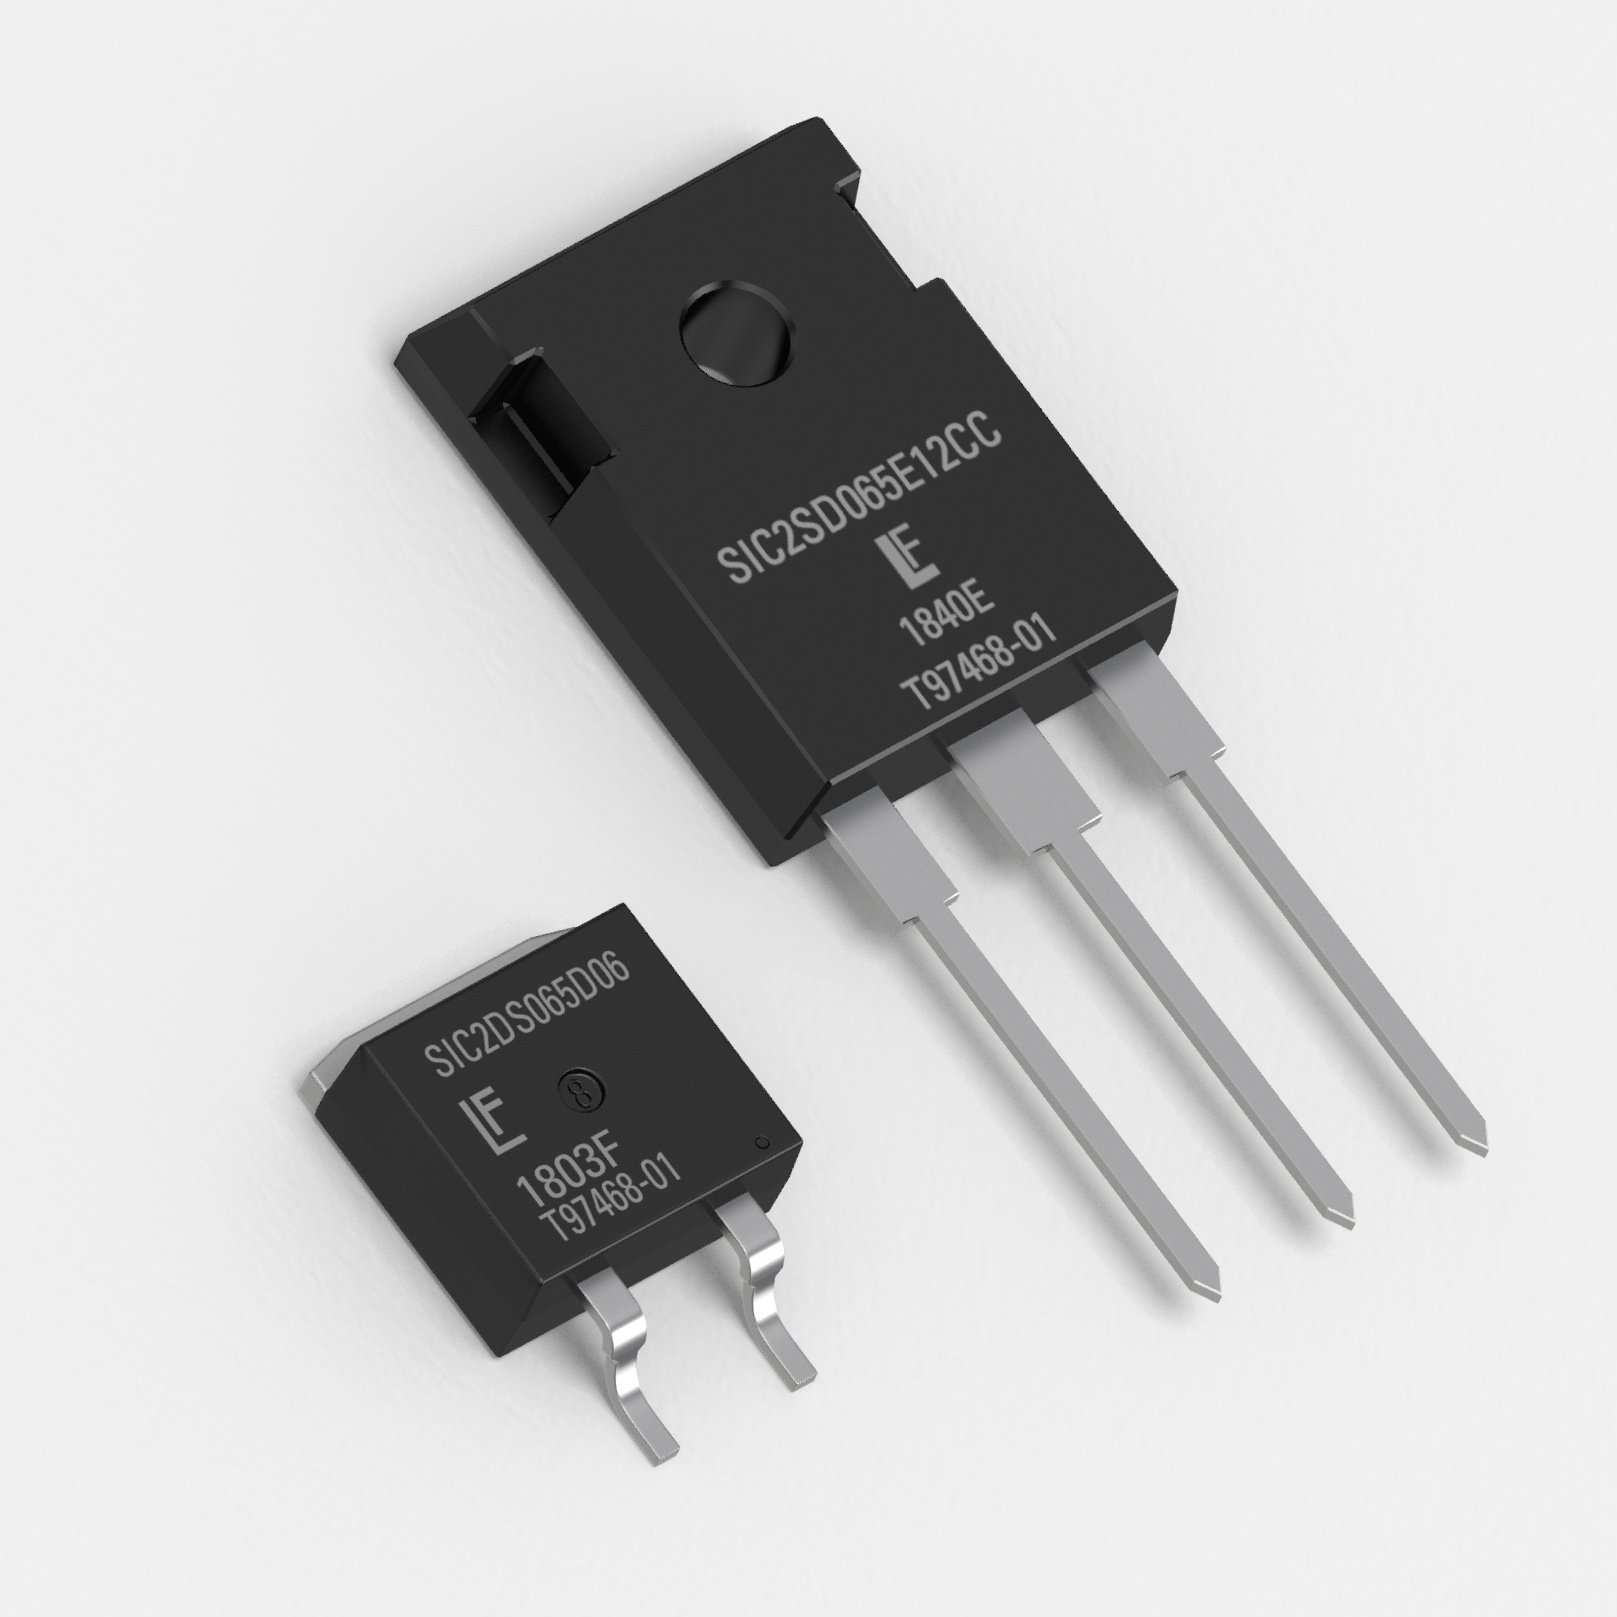 650V SiC Schottky Diodes with Current Ratings from 6A to 40A